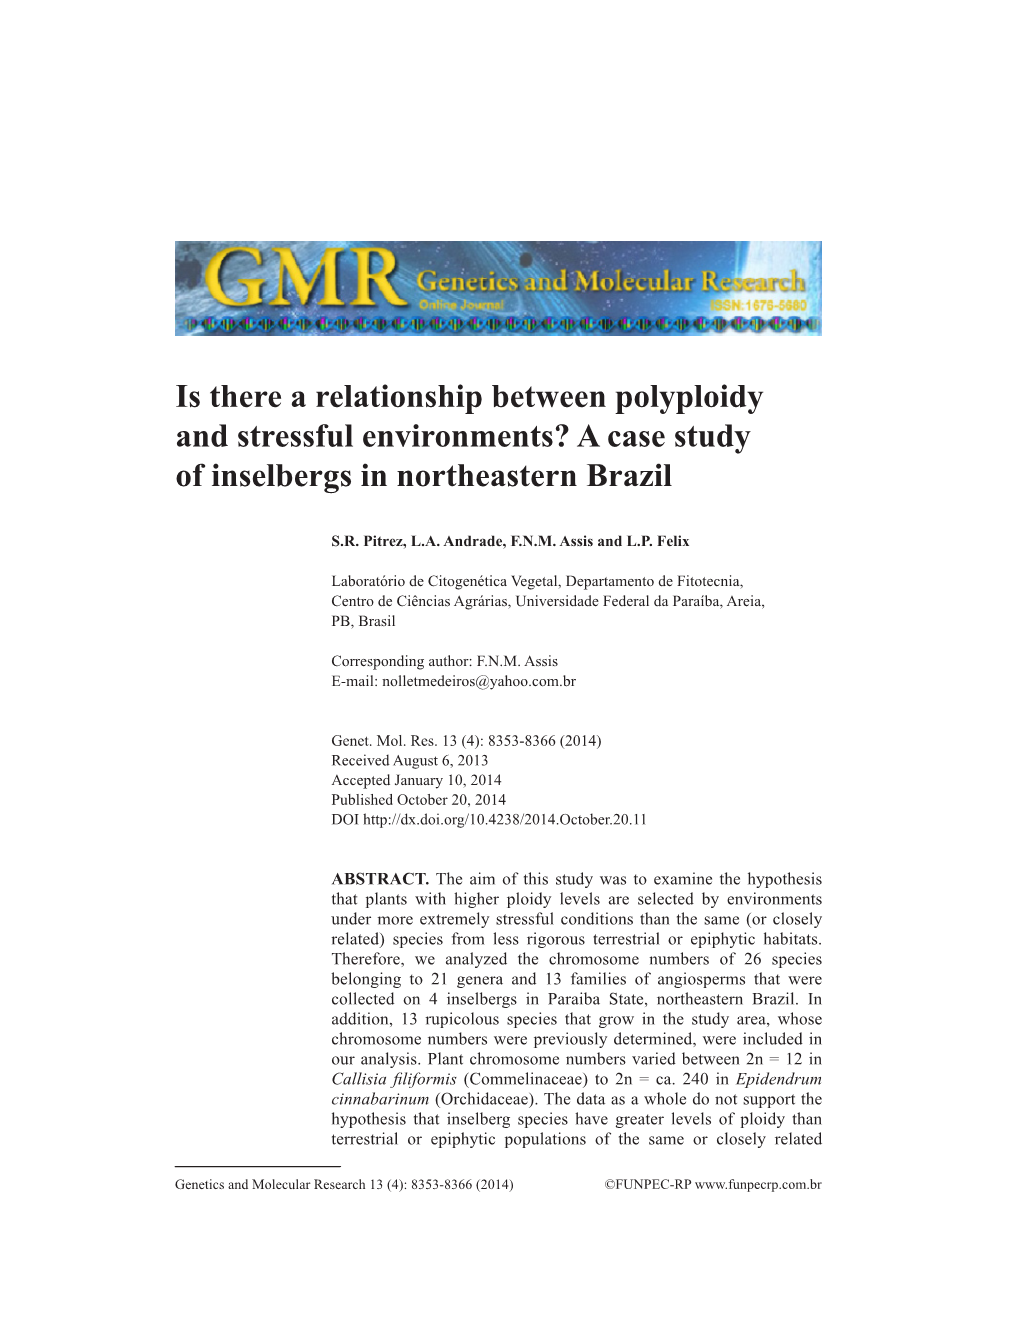 Is There a Relationship Between Polyploidy and Stressful Environments? a Case Study of Inselbergs in Northeastern Brazil